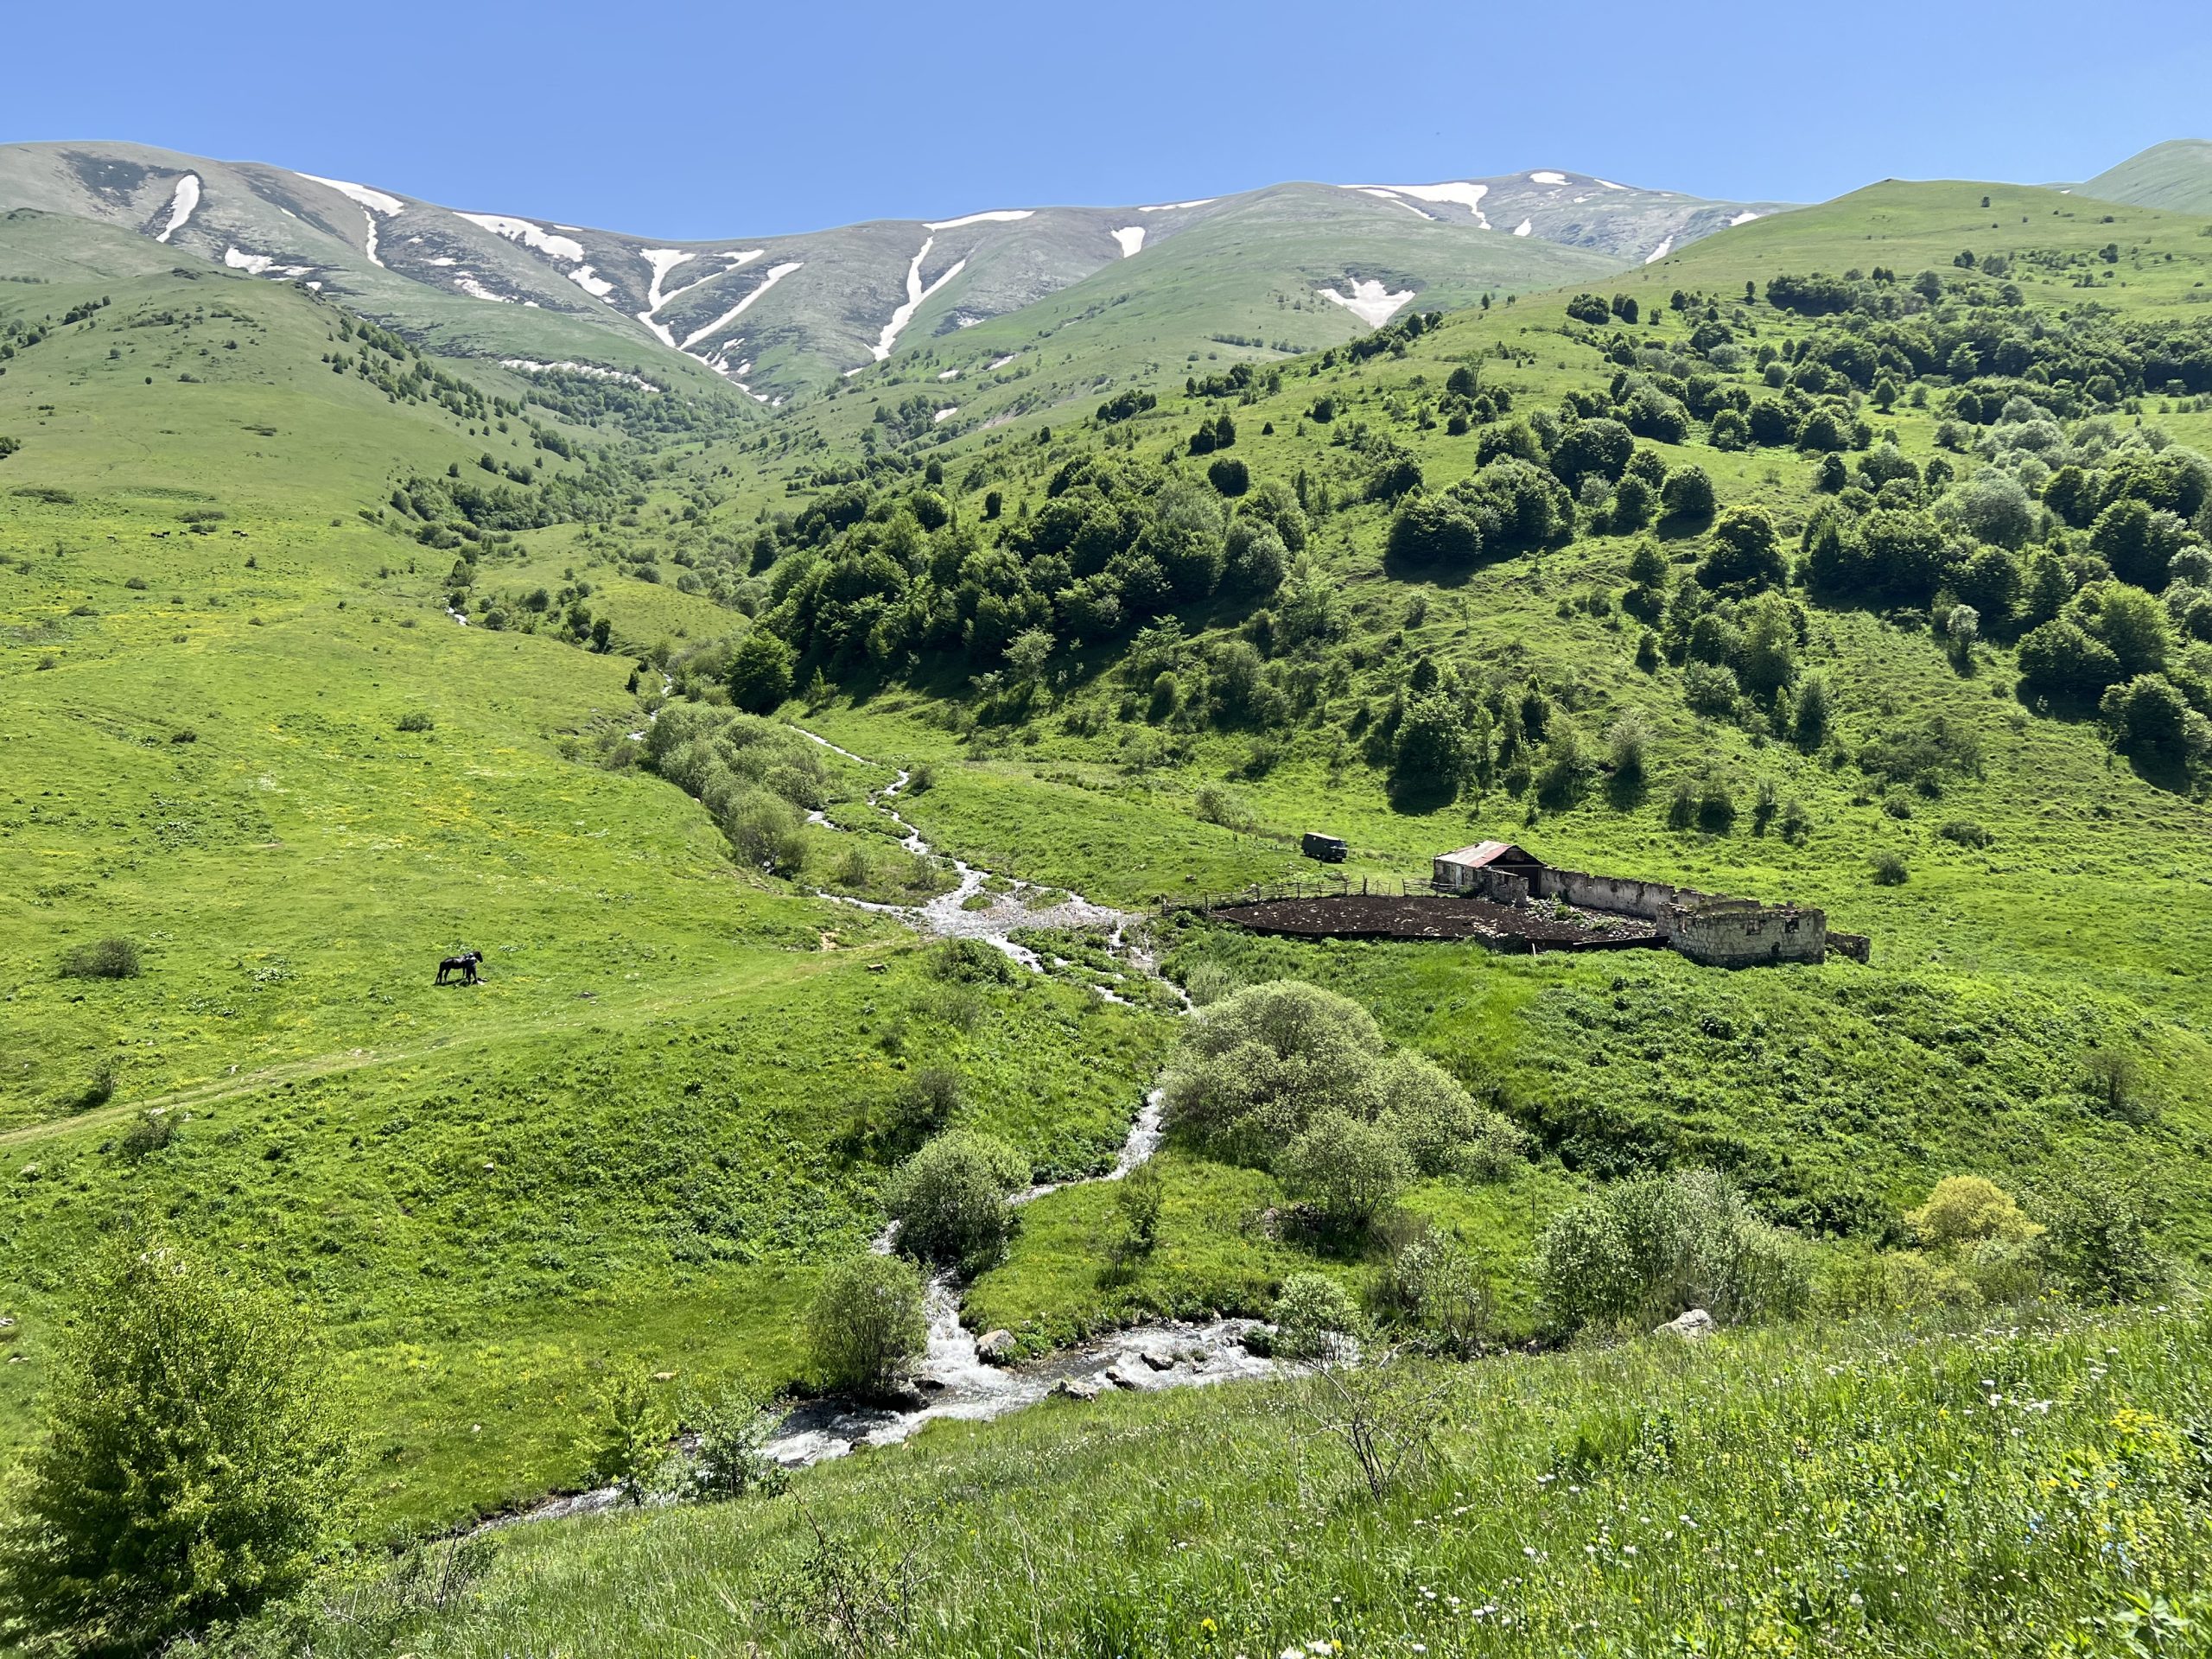 Armenia looks to reforestation to combat climate change